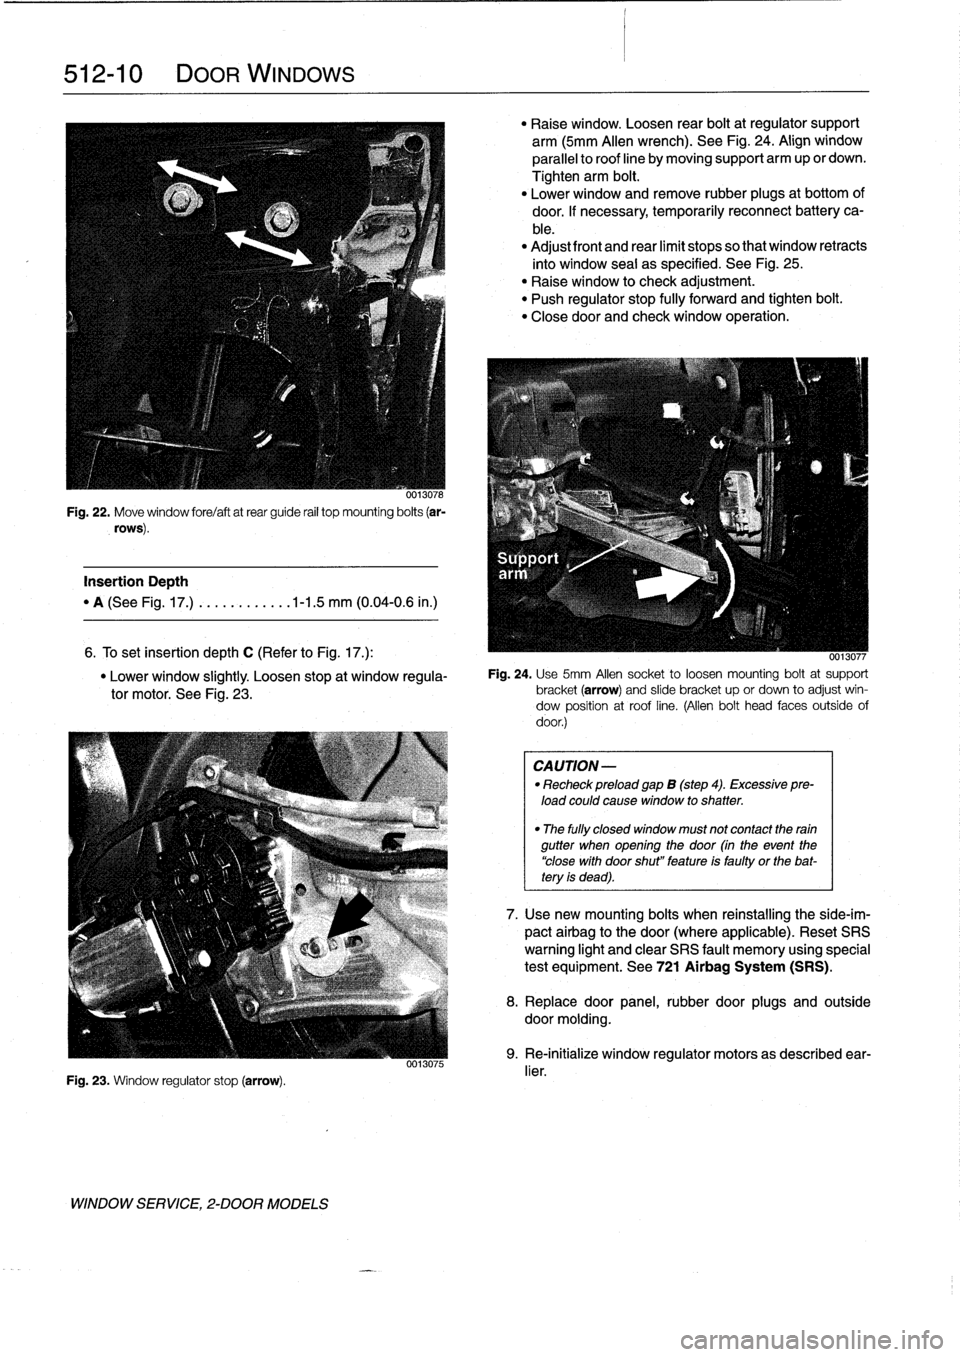 BMW 323i 1998 E36 Workshop Manual 
512-
1
0

	

DOOR
WINDOWS

0013078

Fig
.
22
.
Move
window
fore/aftatrear
guide
rail
top
mounting
bolts
(ar-

rows)
.

Insertion
Depth

"
A
(See
Fig
.
17
.)
.
..........
.1-1
.5
mm
(0
.04-0
.6
in
.)
